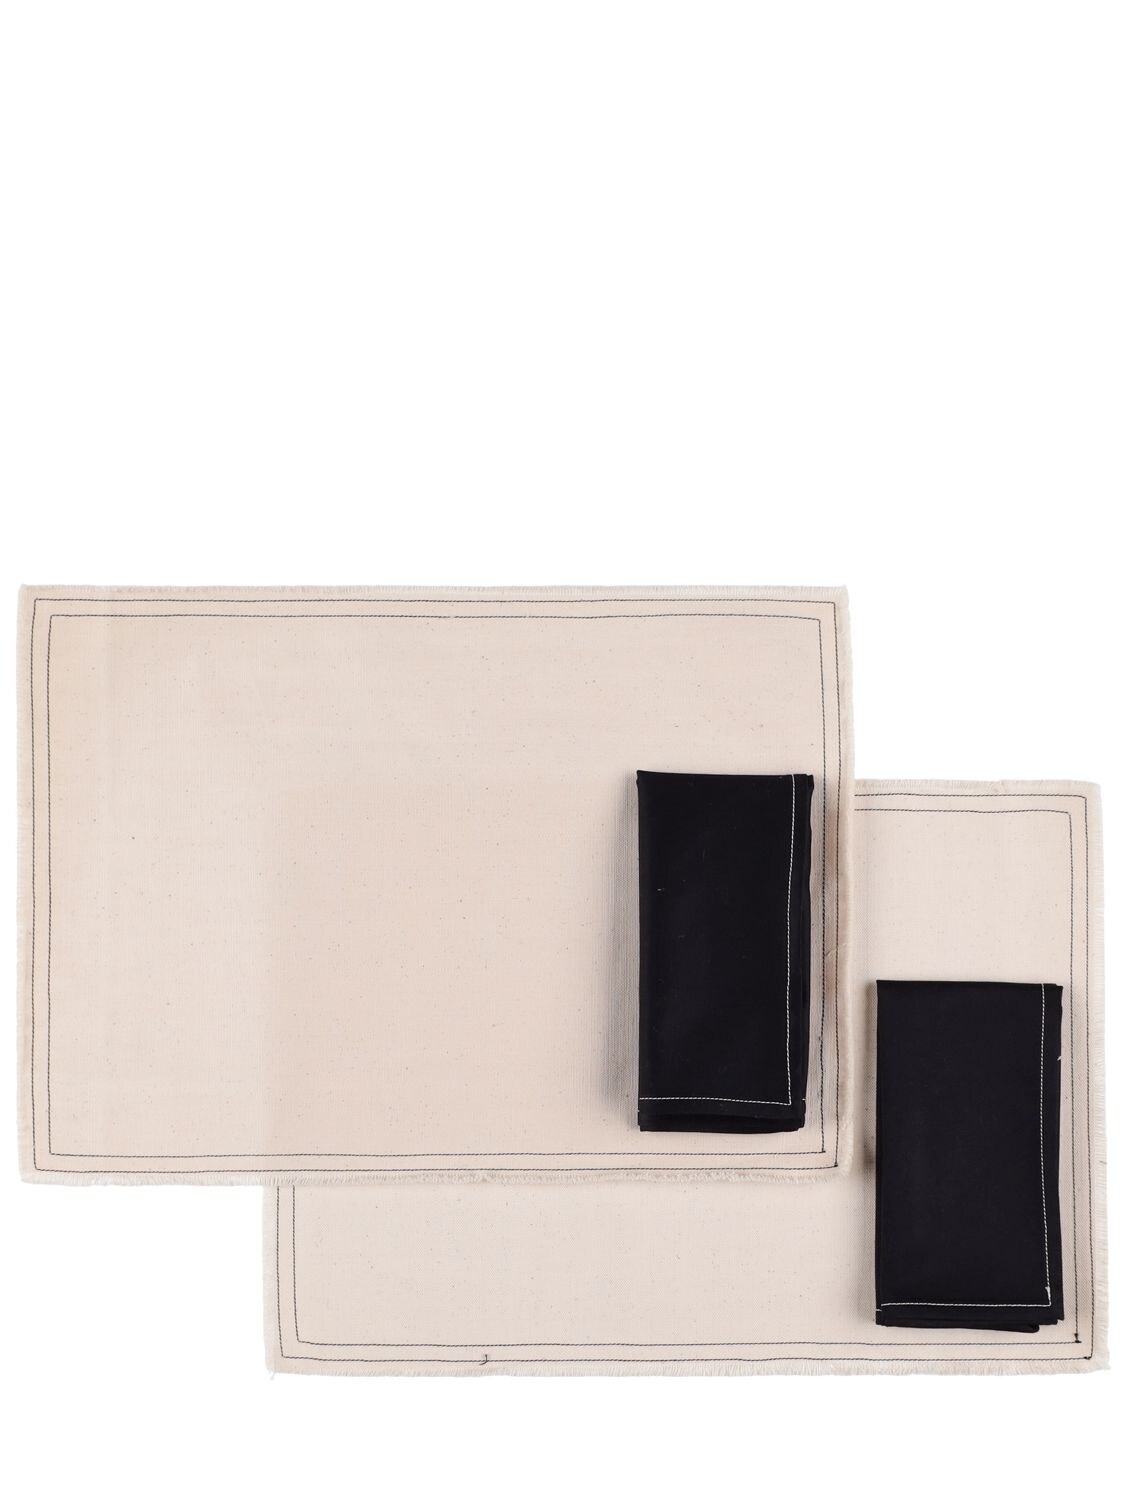 Alessandro Di Marco Set Of 2 Placemats & Napkins In Beige,black